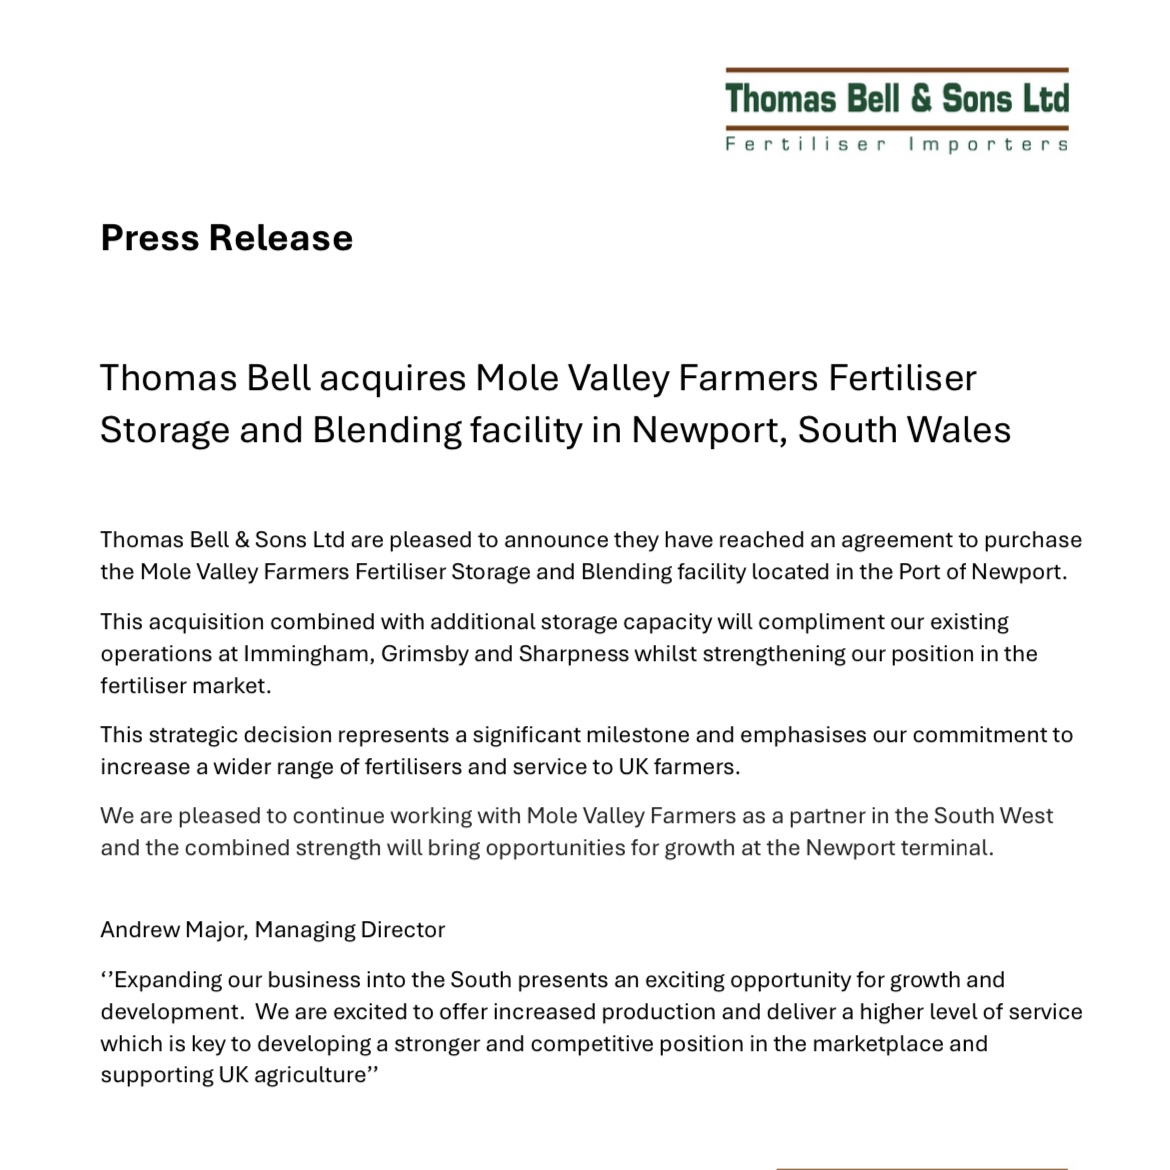 Press Release Thomas Bell acquires Mole Valley Farmers Fertiliser Storage and Blending facility in Newport, South Wales #fertiliser #agriculture #farming